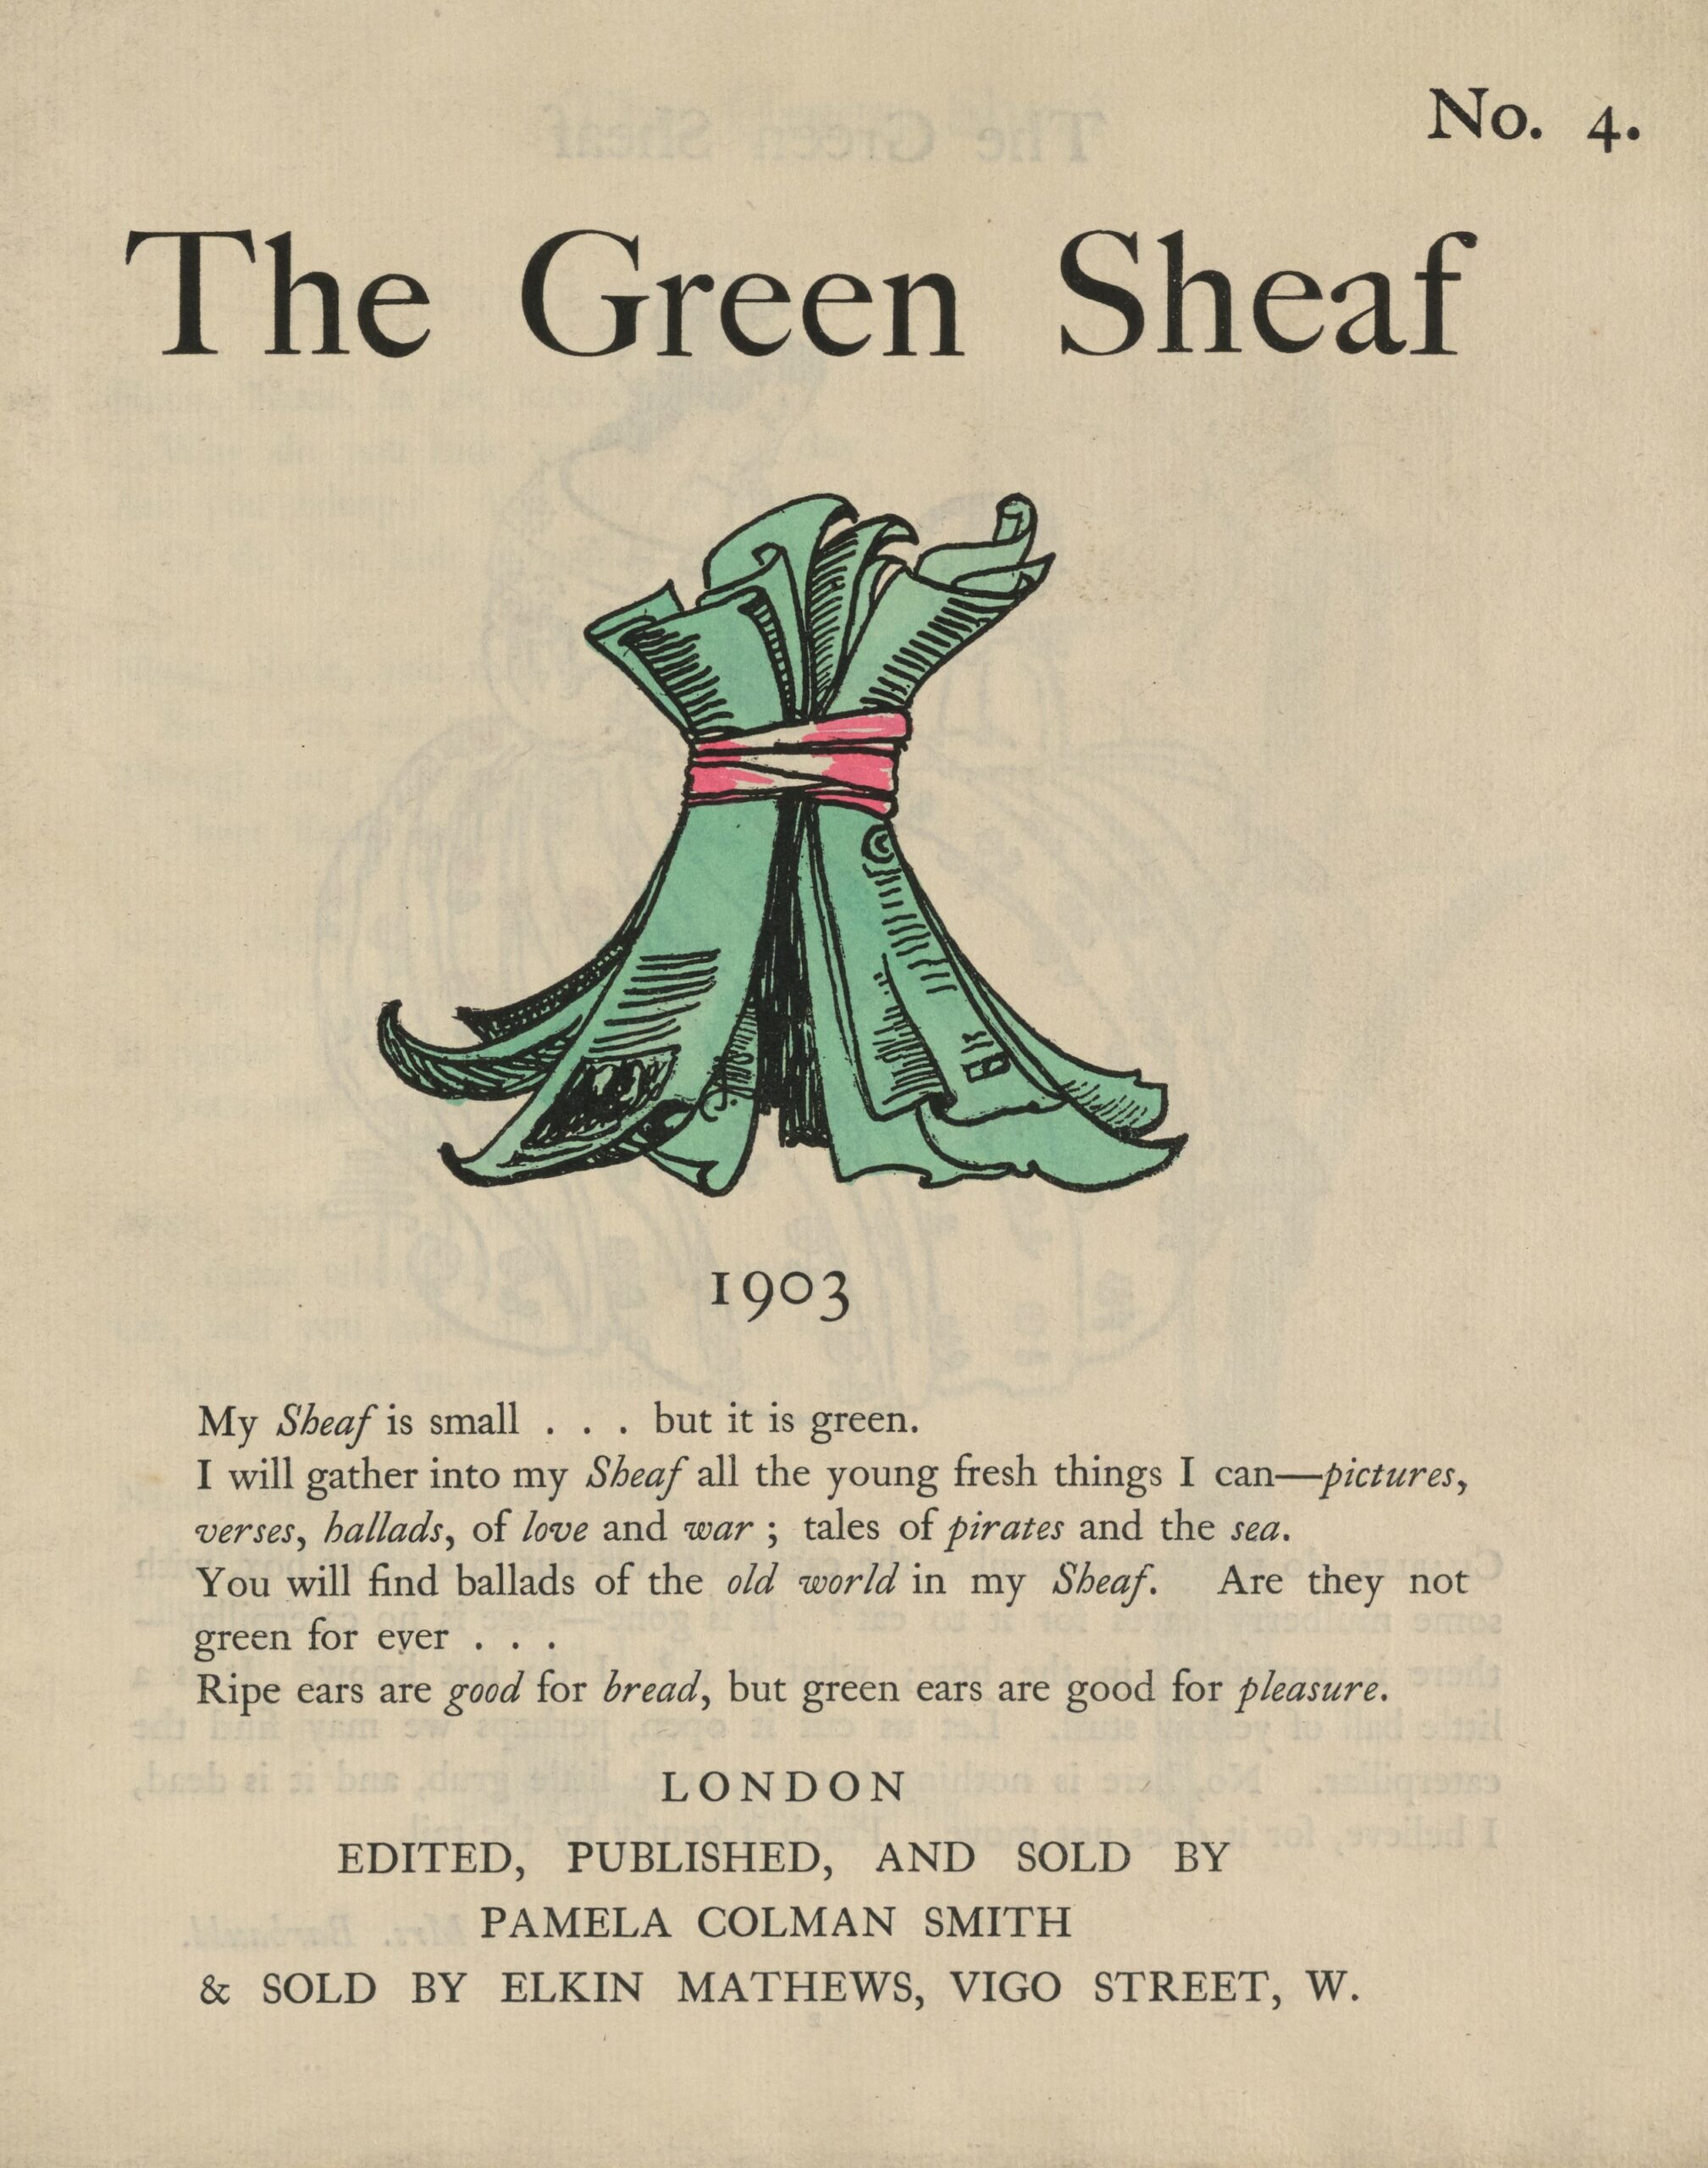 The hand-coloured illustration is centered on the tan page. In the top right corner, the text “No. 4” is printed. Above the illustration, near the top of the page, the text “The Green Sheaf '' is printed in black ink in a large serif font. Next follows the illustration of green-coloured printed and illustrated pages, tied together in a sheaf with a red ribbon. The artist’s monogram signature “PCS” is visible on one of the pages. Below the illustration, centered on the page, is the year, 1903, followed, in slightly smaller text, by Smith’s manifesto, first printed at the back of the first volume of The Green Sheaf: “My Sheaf is small… but it is green. / I will gather into my Sheaf all the fresh young things I can—pictures, / verses, ballads, of love and war; tales of pirates and the sea. / You will find ballads of the old world in my Sheaf. Are they not / green for ever… / Ripe ears are good for bread, but green ears are good for pleasure.” Below this, centered, is printed: “LONDON / EDITED, PUBLISHED, AND SOLD BY/ PAMELA COLMAN SMITH/ & ELKIN MATTHEWS, VIGO STREET, W.”